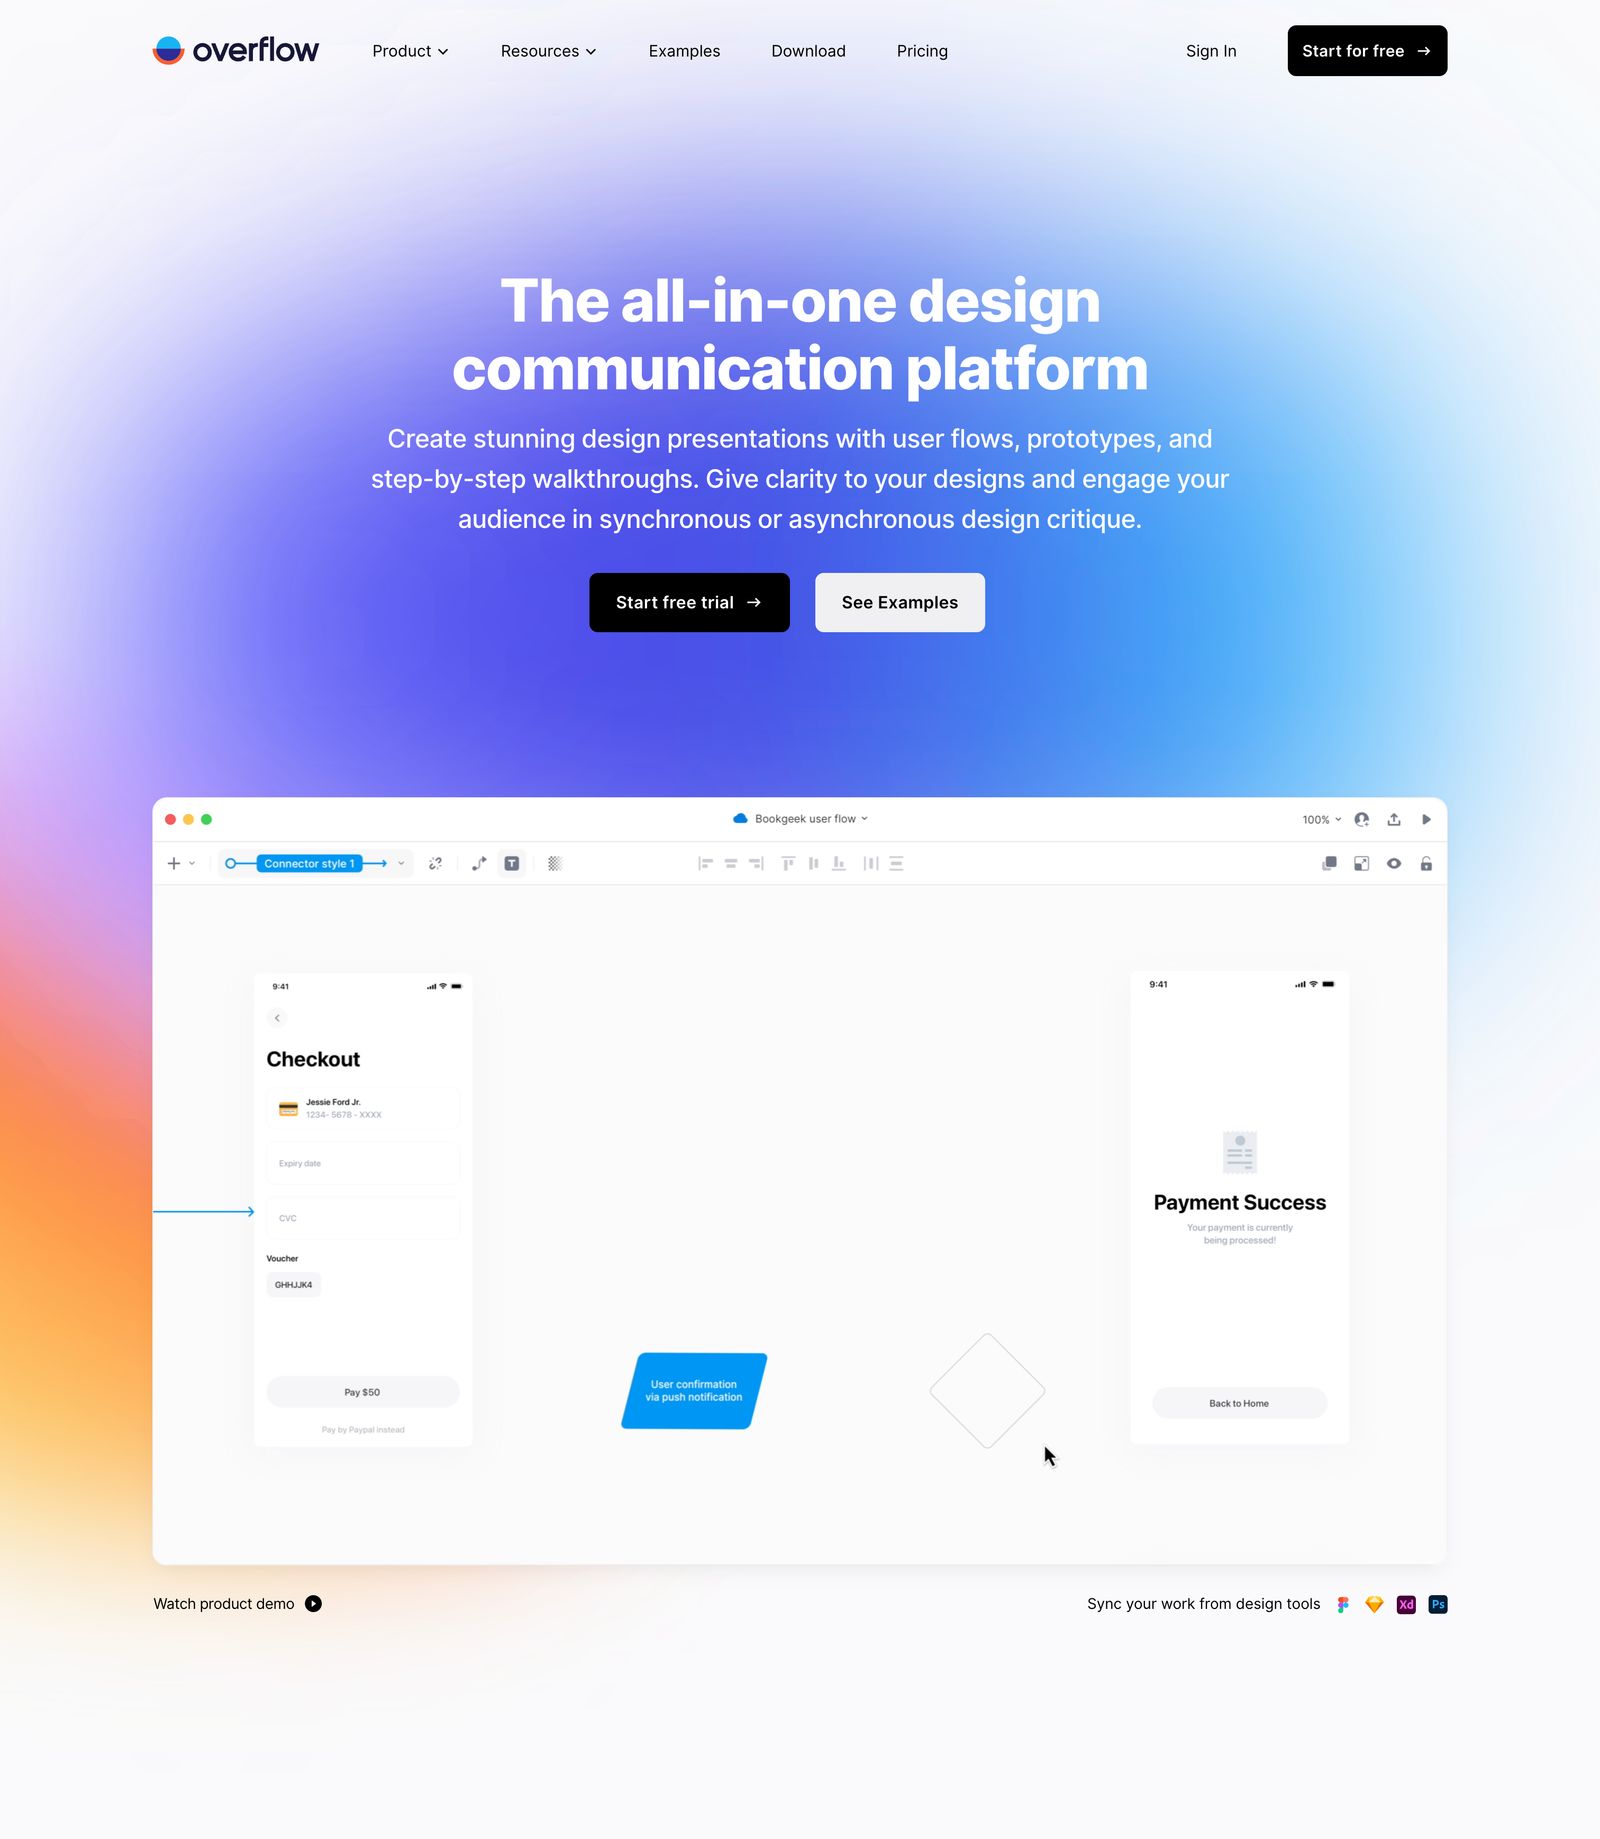 /articles/landing-page-inspiration/landing-page-design-example-1.jpg)_Saas Landing page example from Overflow